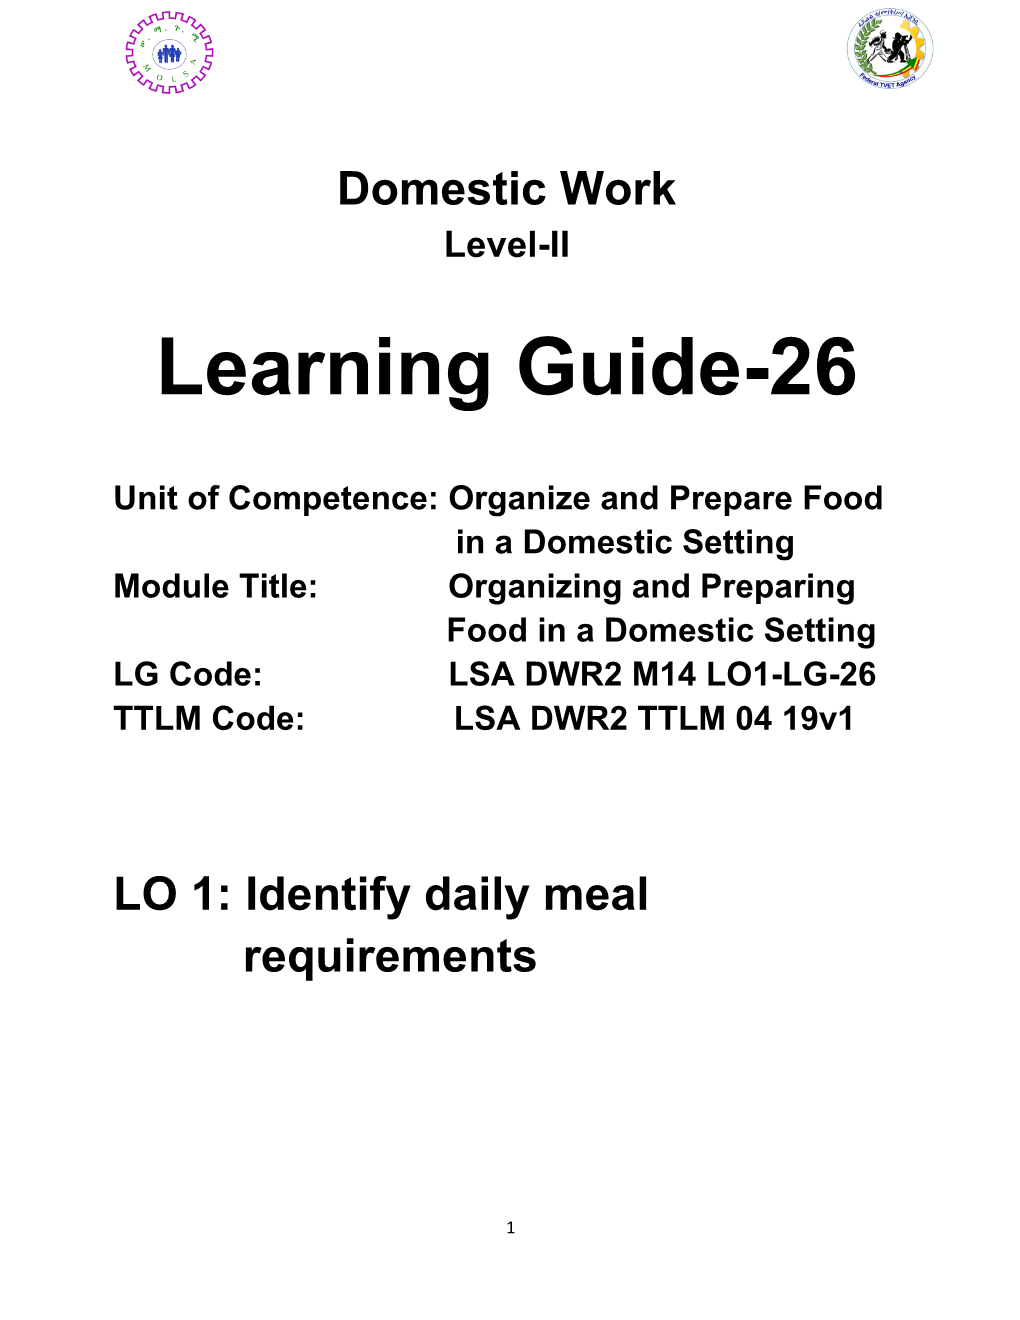 Learning Guide-26